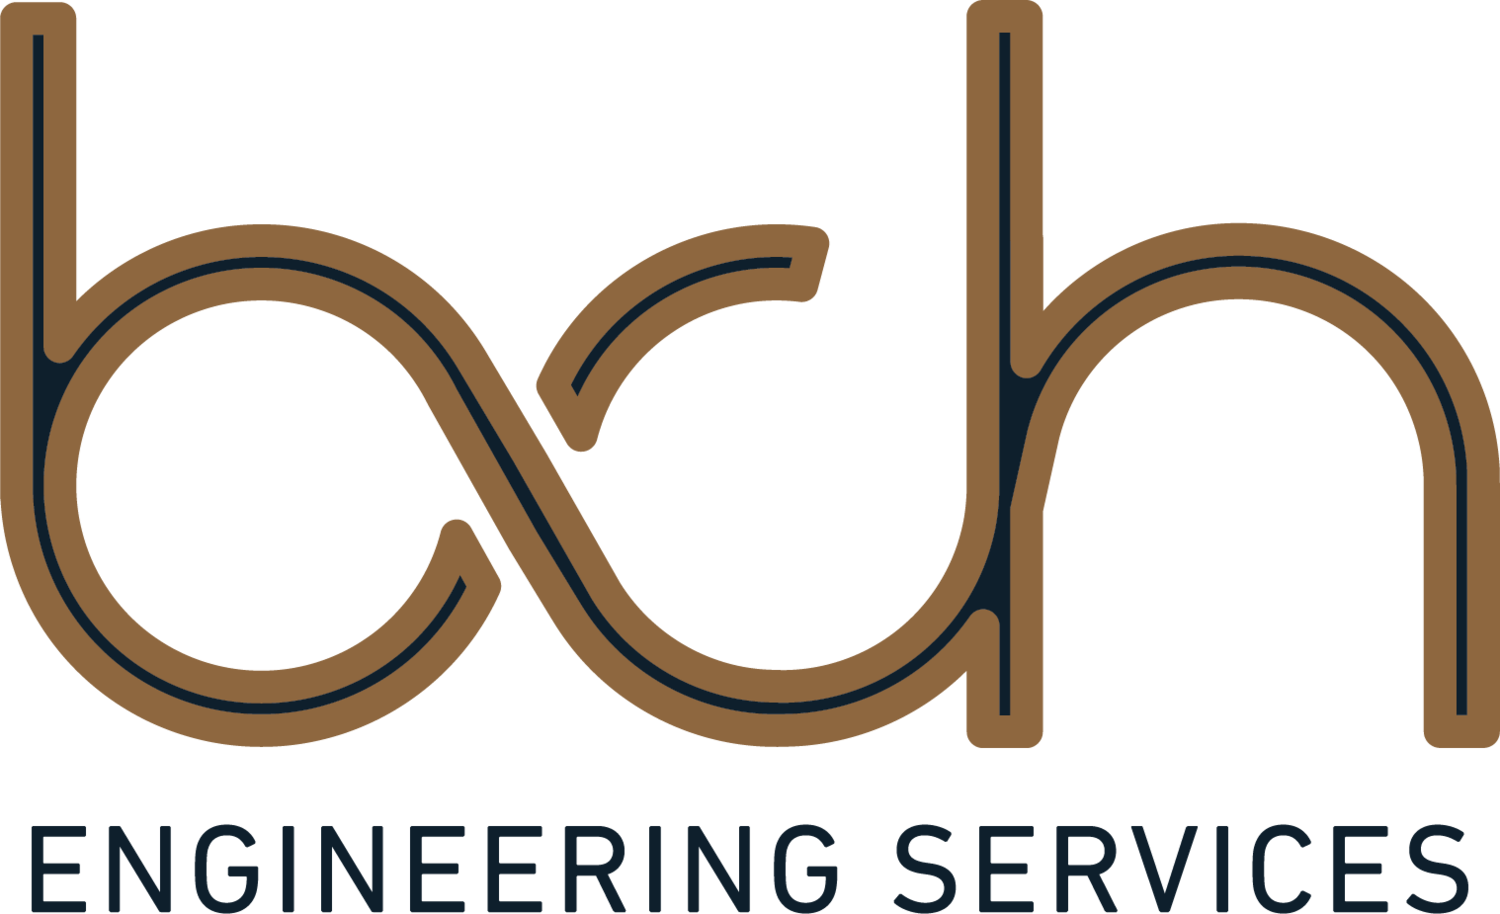 BCH Engineering Services Pty Ltd